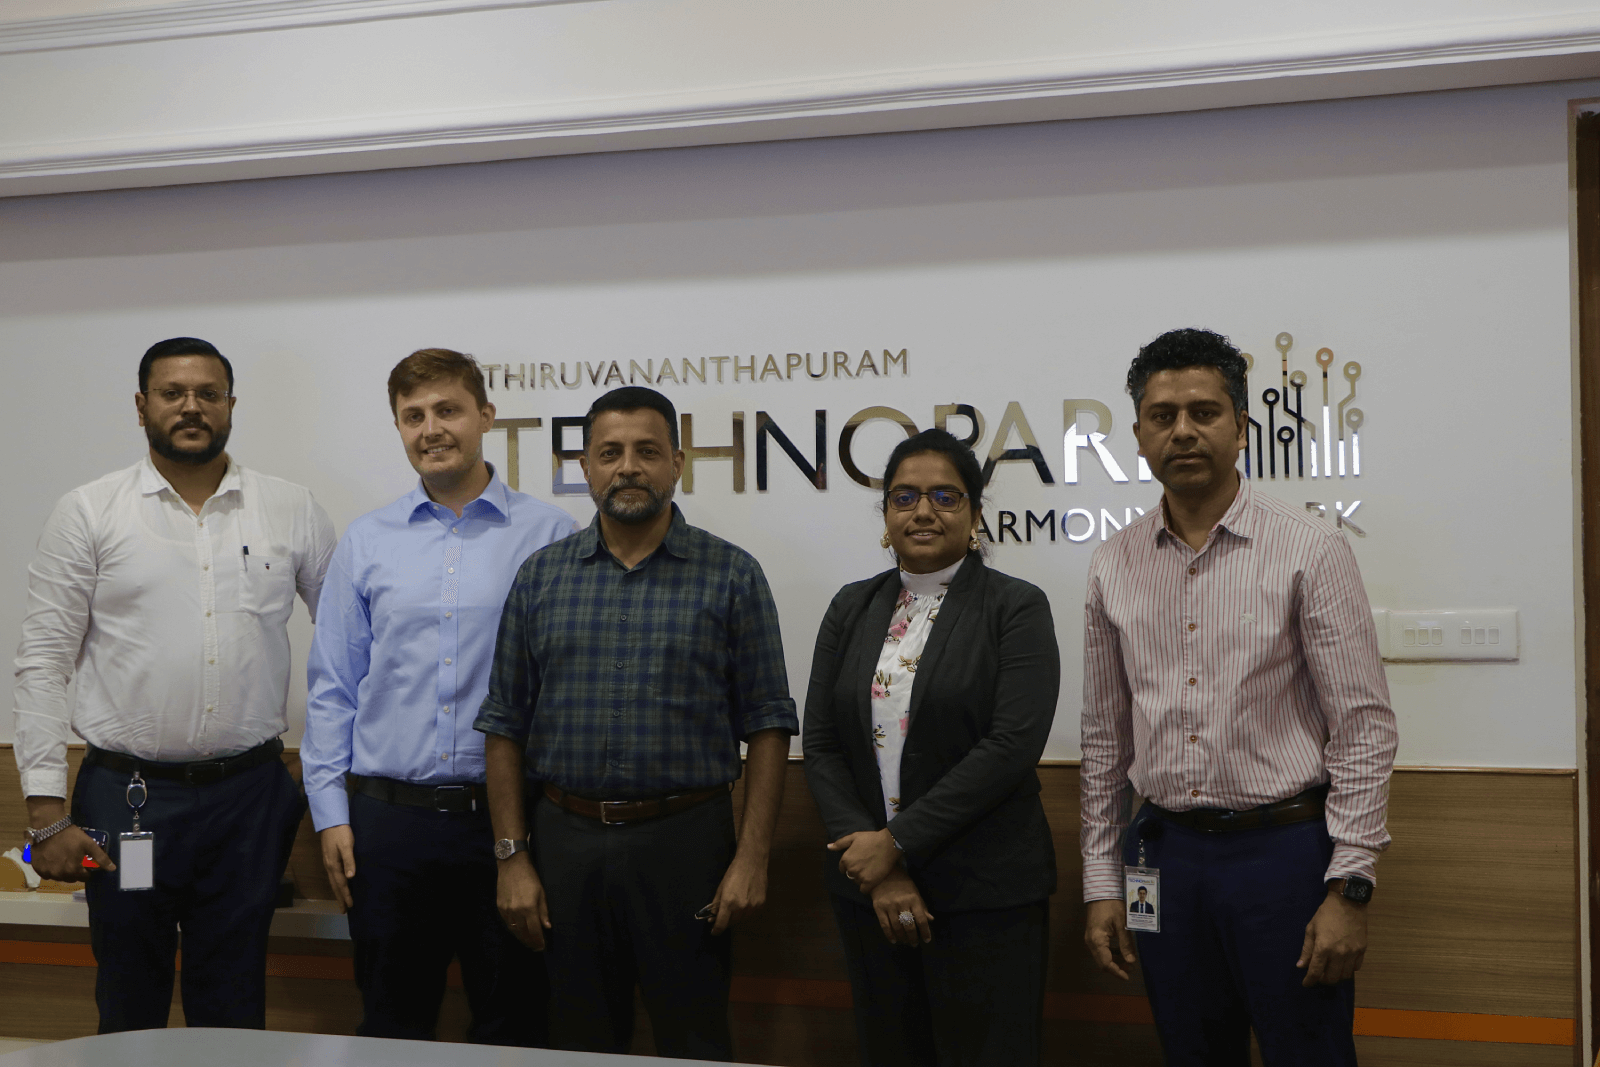 Delegates from the British High Commission in India